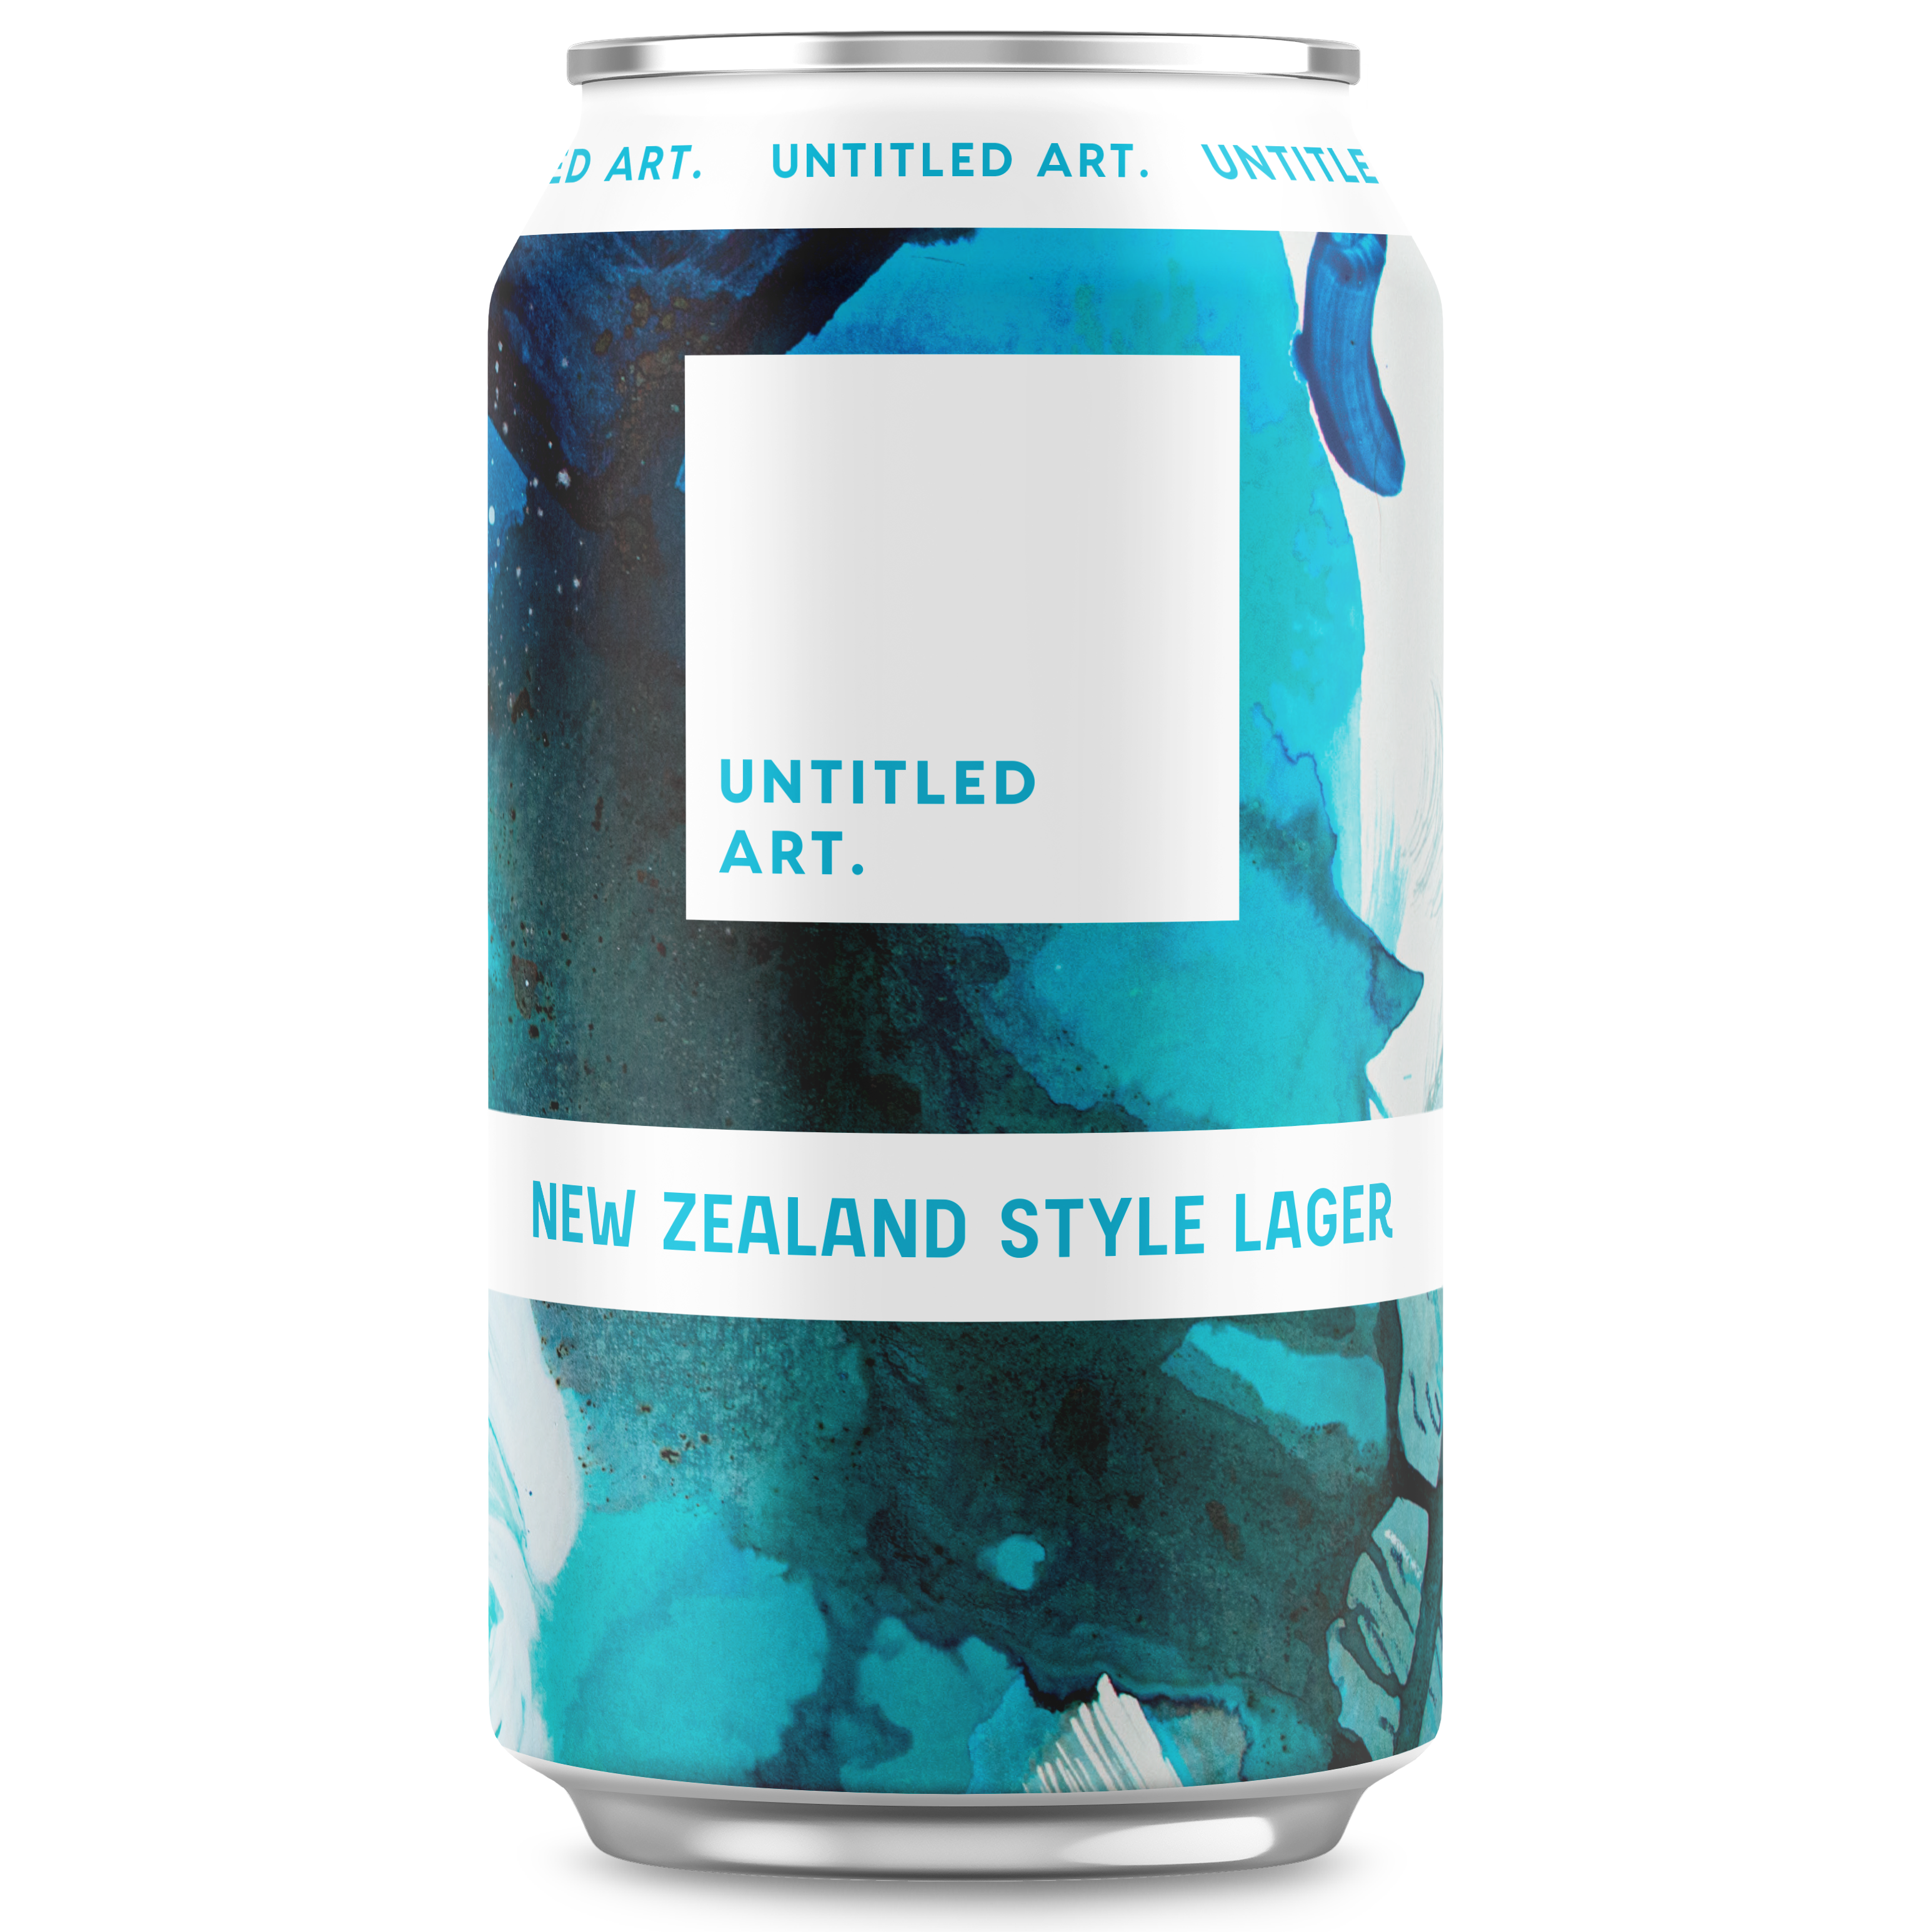 A can of a new zealand style lager.